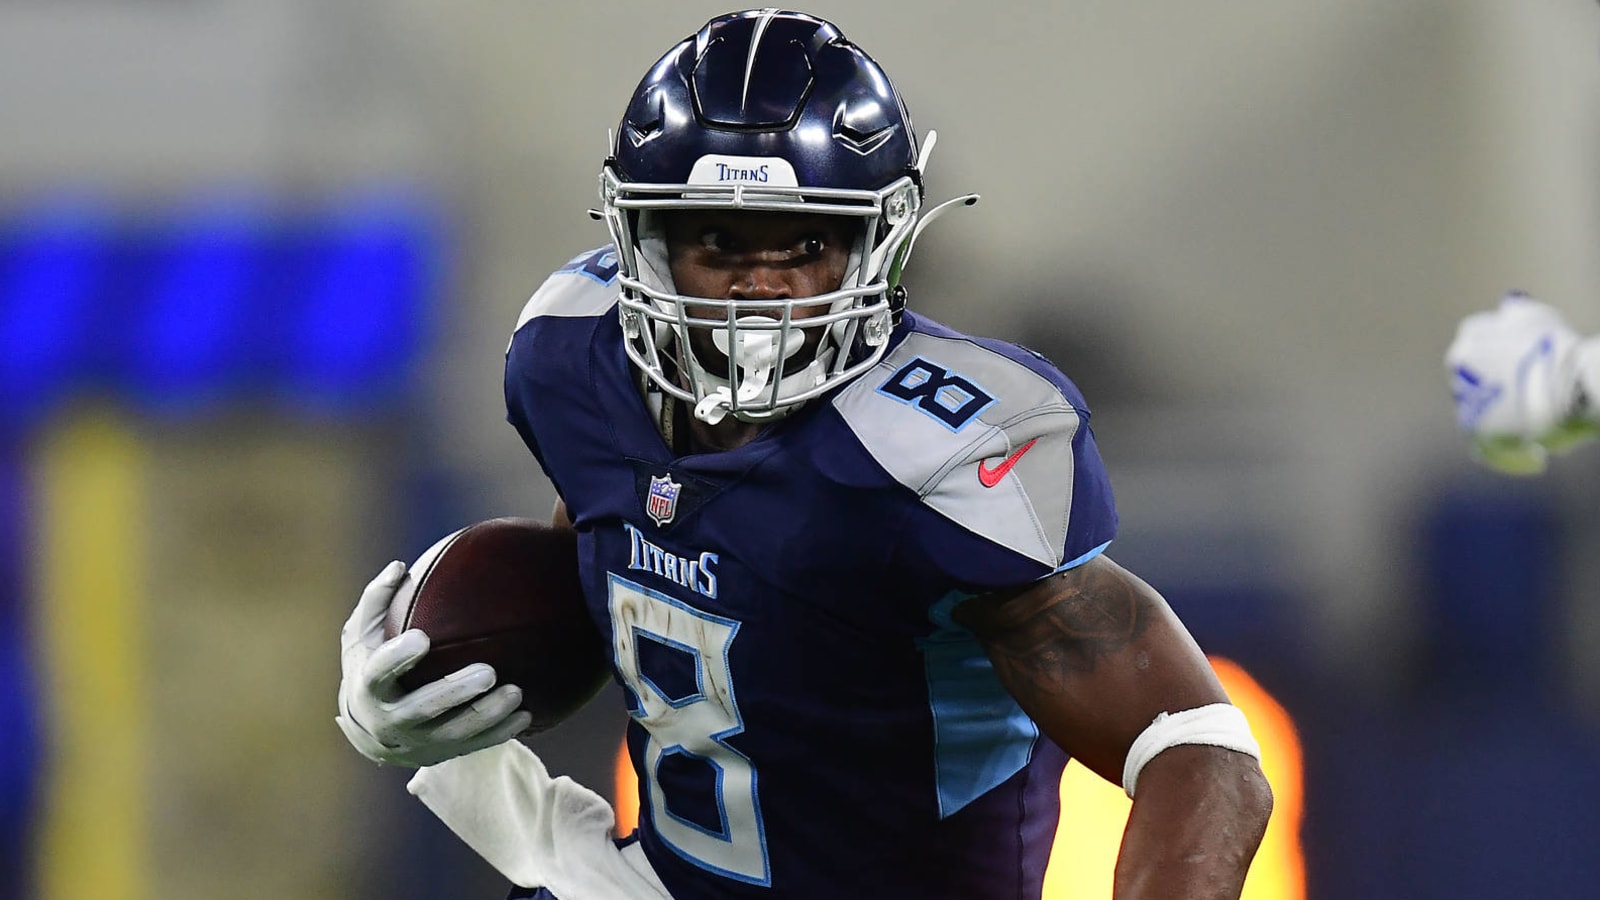 Adrian Peterson says son offered great advice after Titans debut